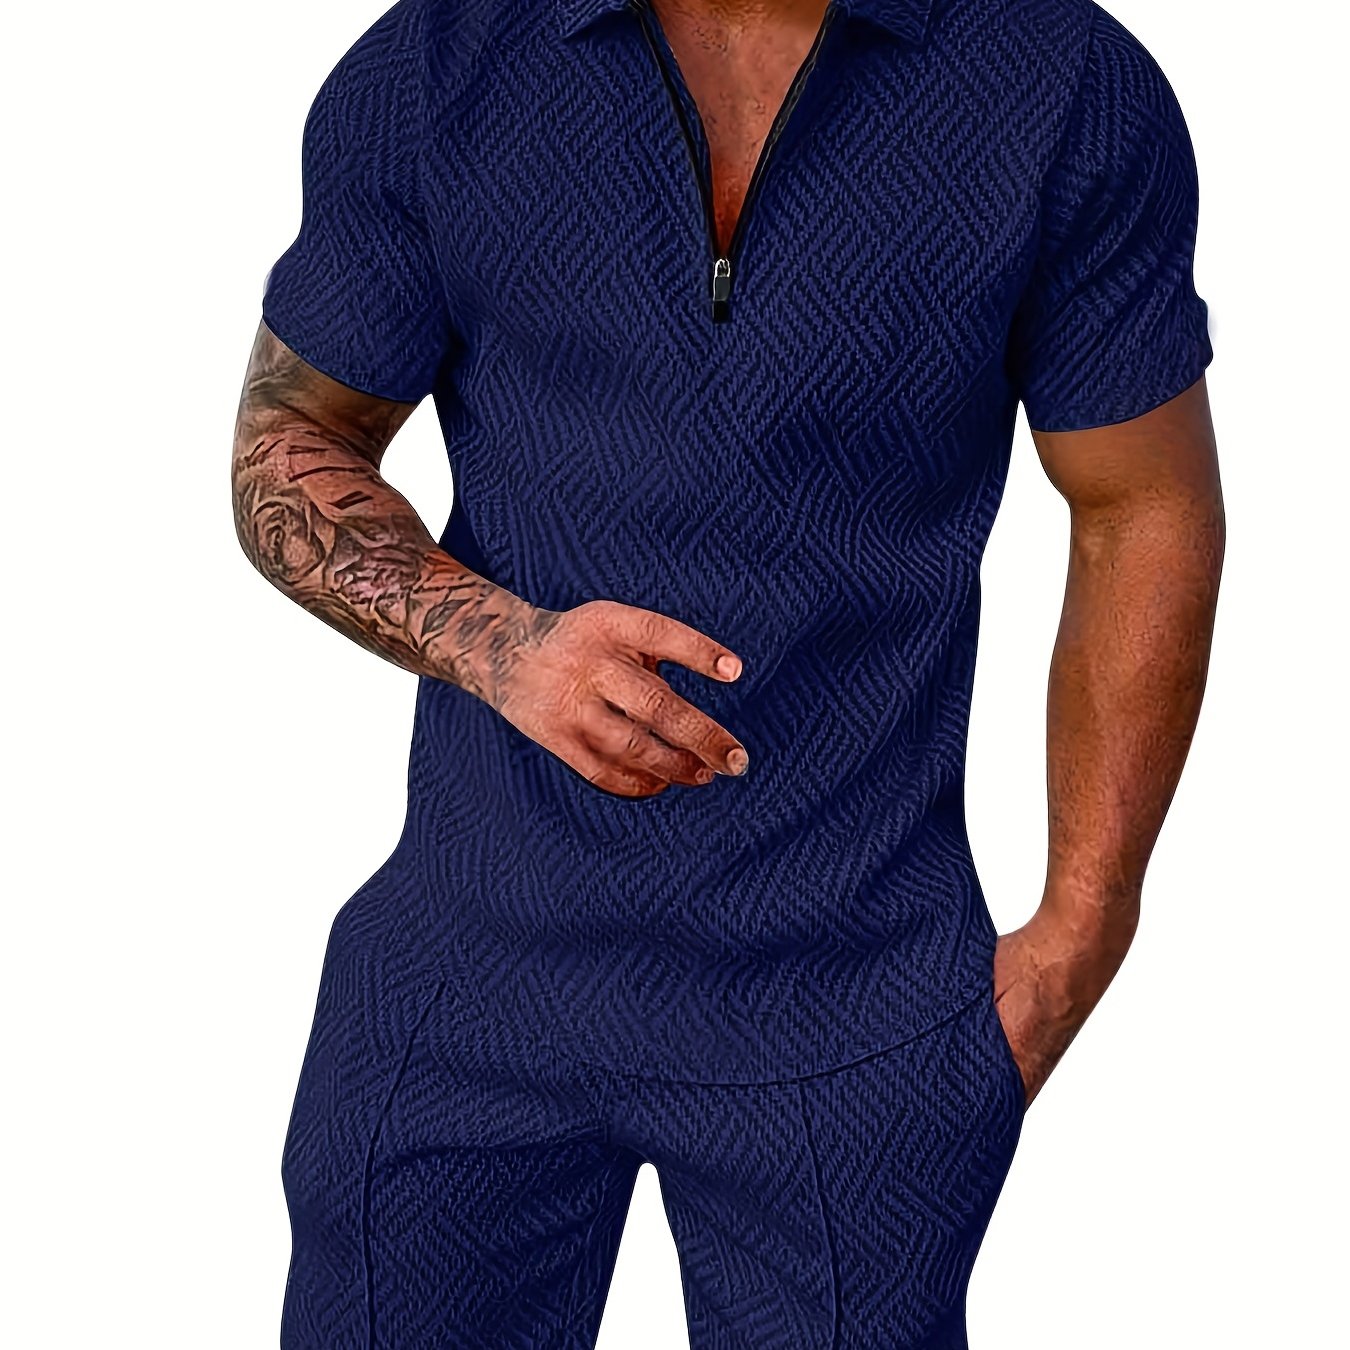 「lovevop」Men's Polyester Thin V-neck Zipper Sweatsuits With V-neck Zipper T-shirt & Shorts Christmas Gifts Best Sellers